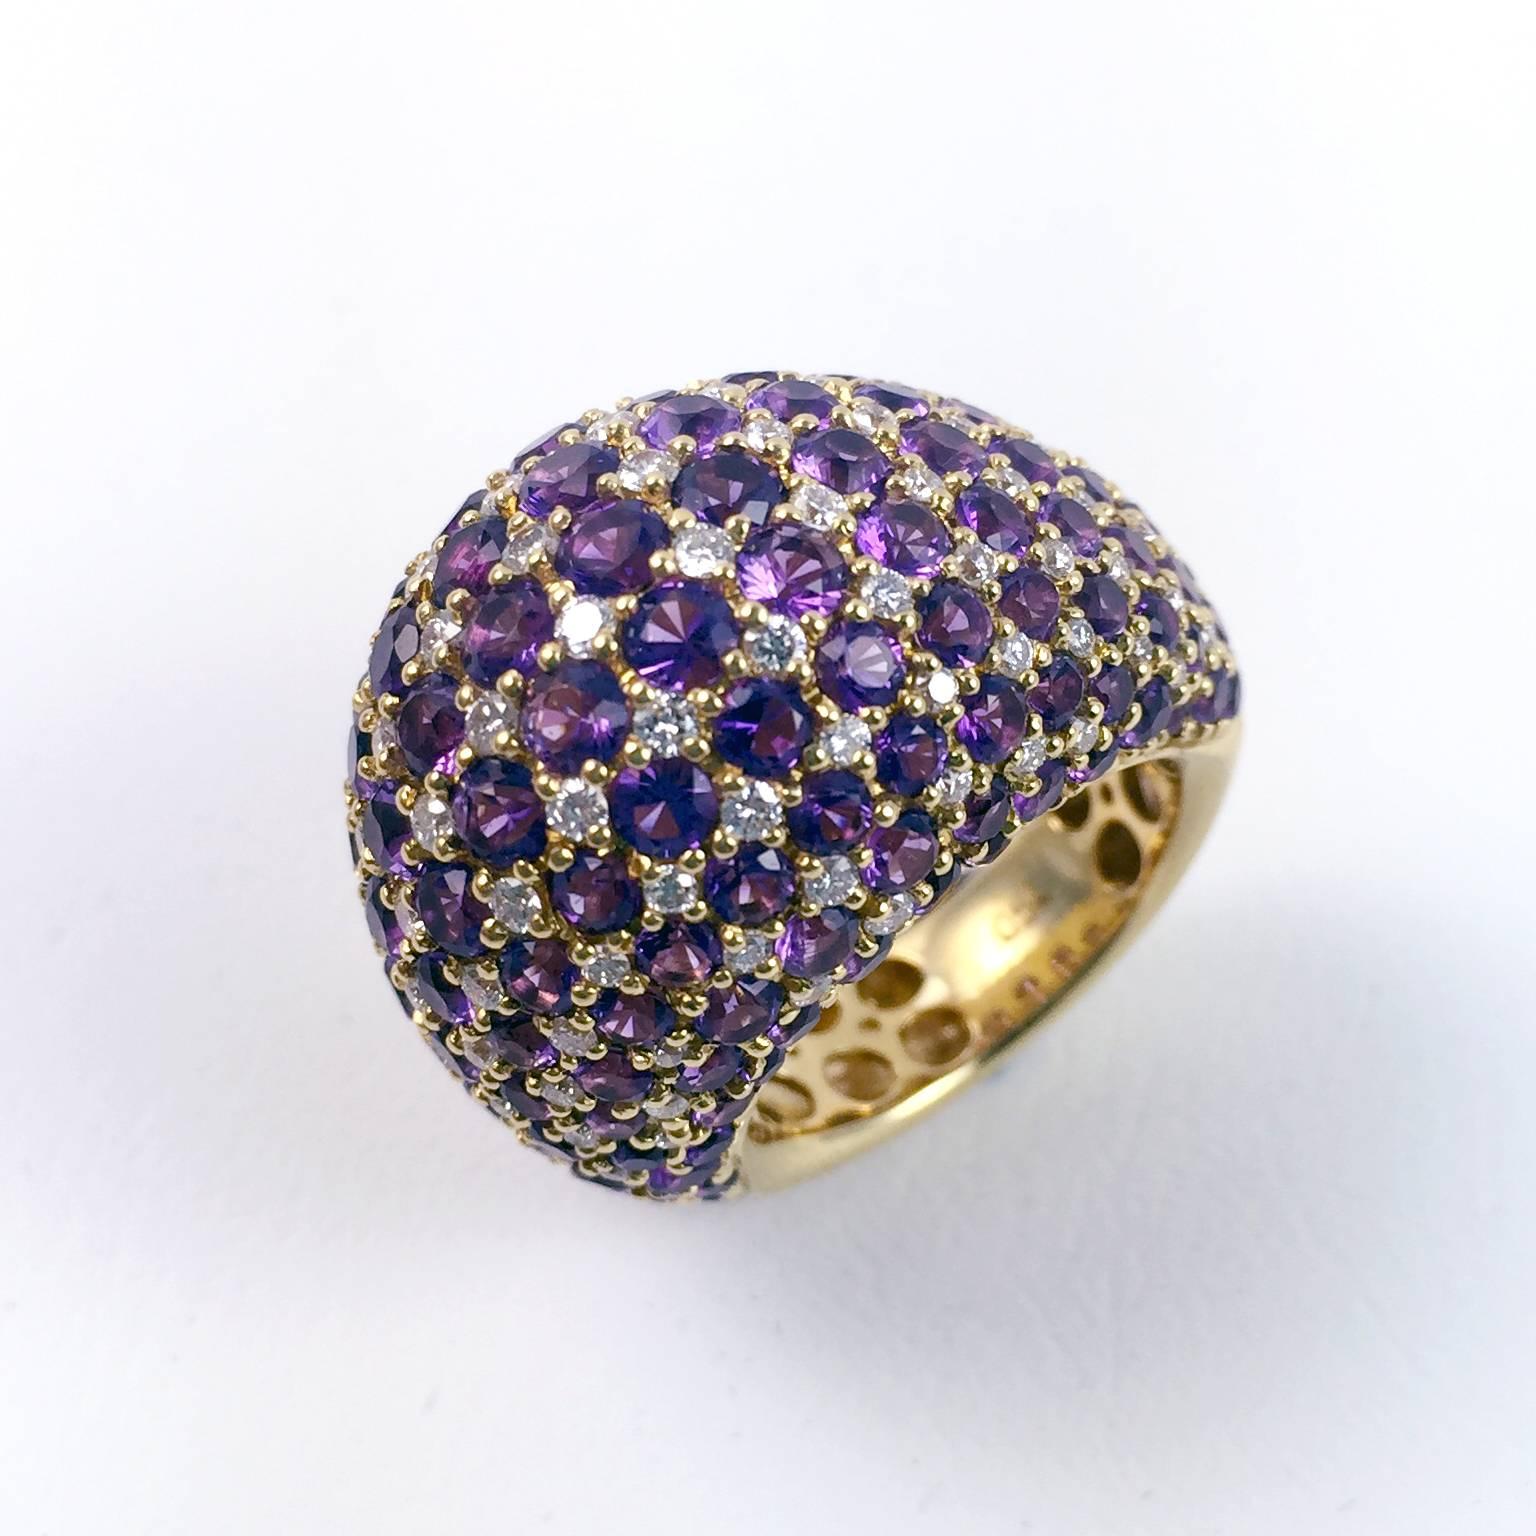 Brilliant cut purple sapphires and diamonds set on a perfectly shaped dome ring.

Sapphires: 8.52 cts , Diamonds : 1.19 cts
weight : 16.35 Grams

Ring Size: 4 ½ (US), 48+ (European). Dome rings are typically (but not exclusively) worn on the